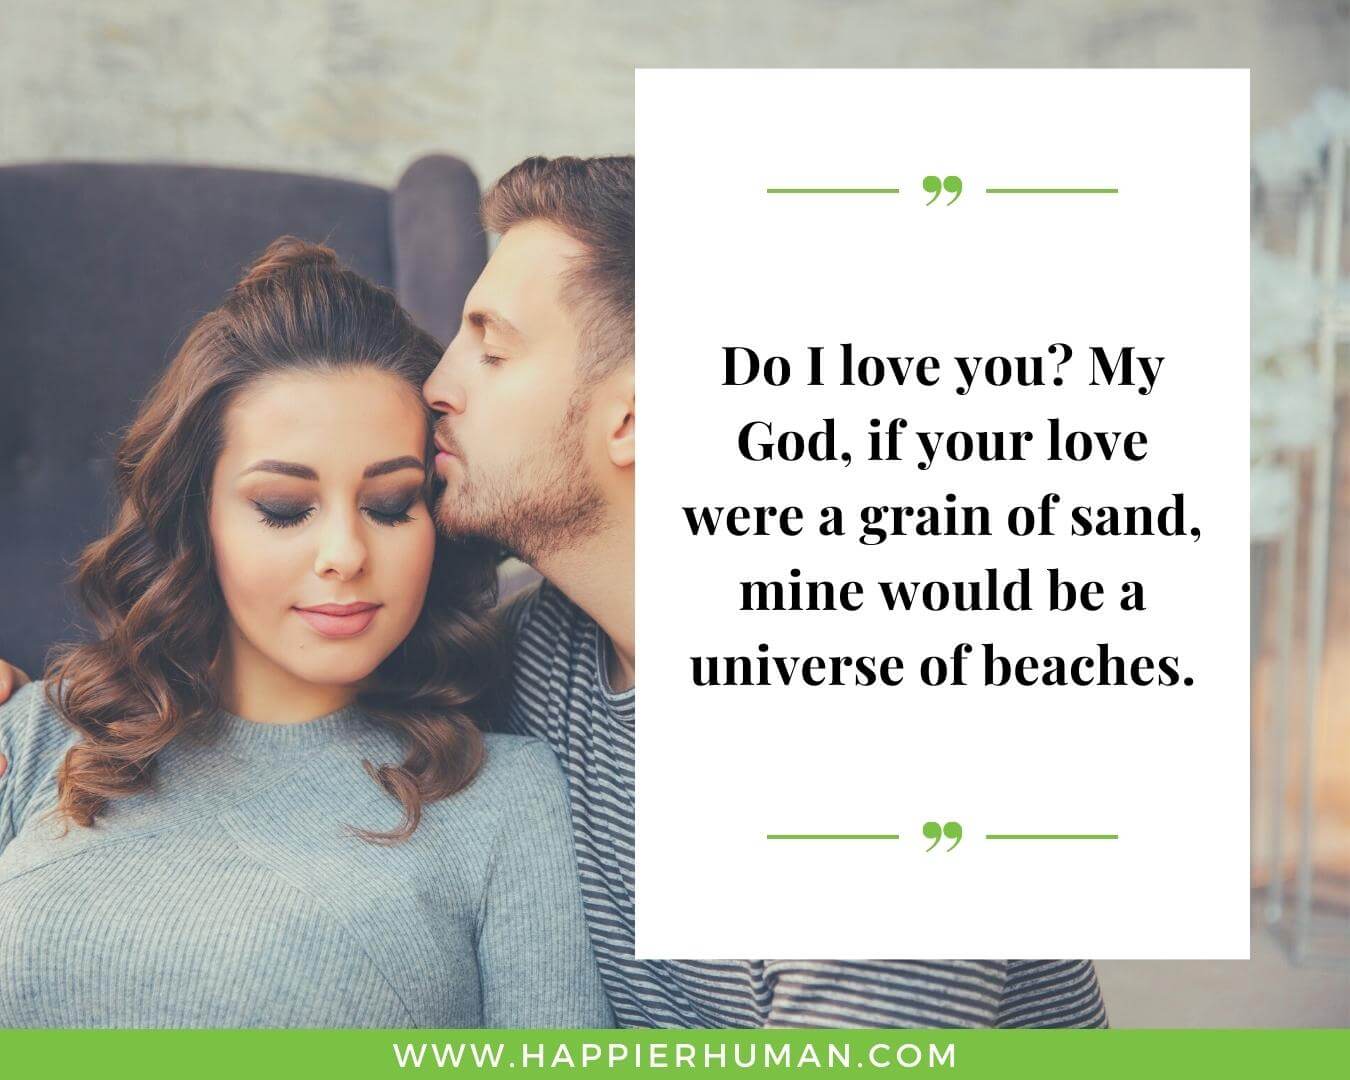 Loving Quotes for Her - “Do I love you? My God, if your love were a grain of sand, mine would be a universe of beaches.”